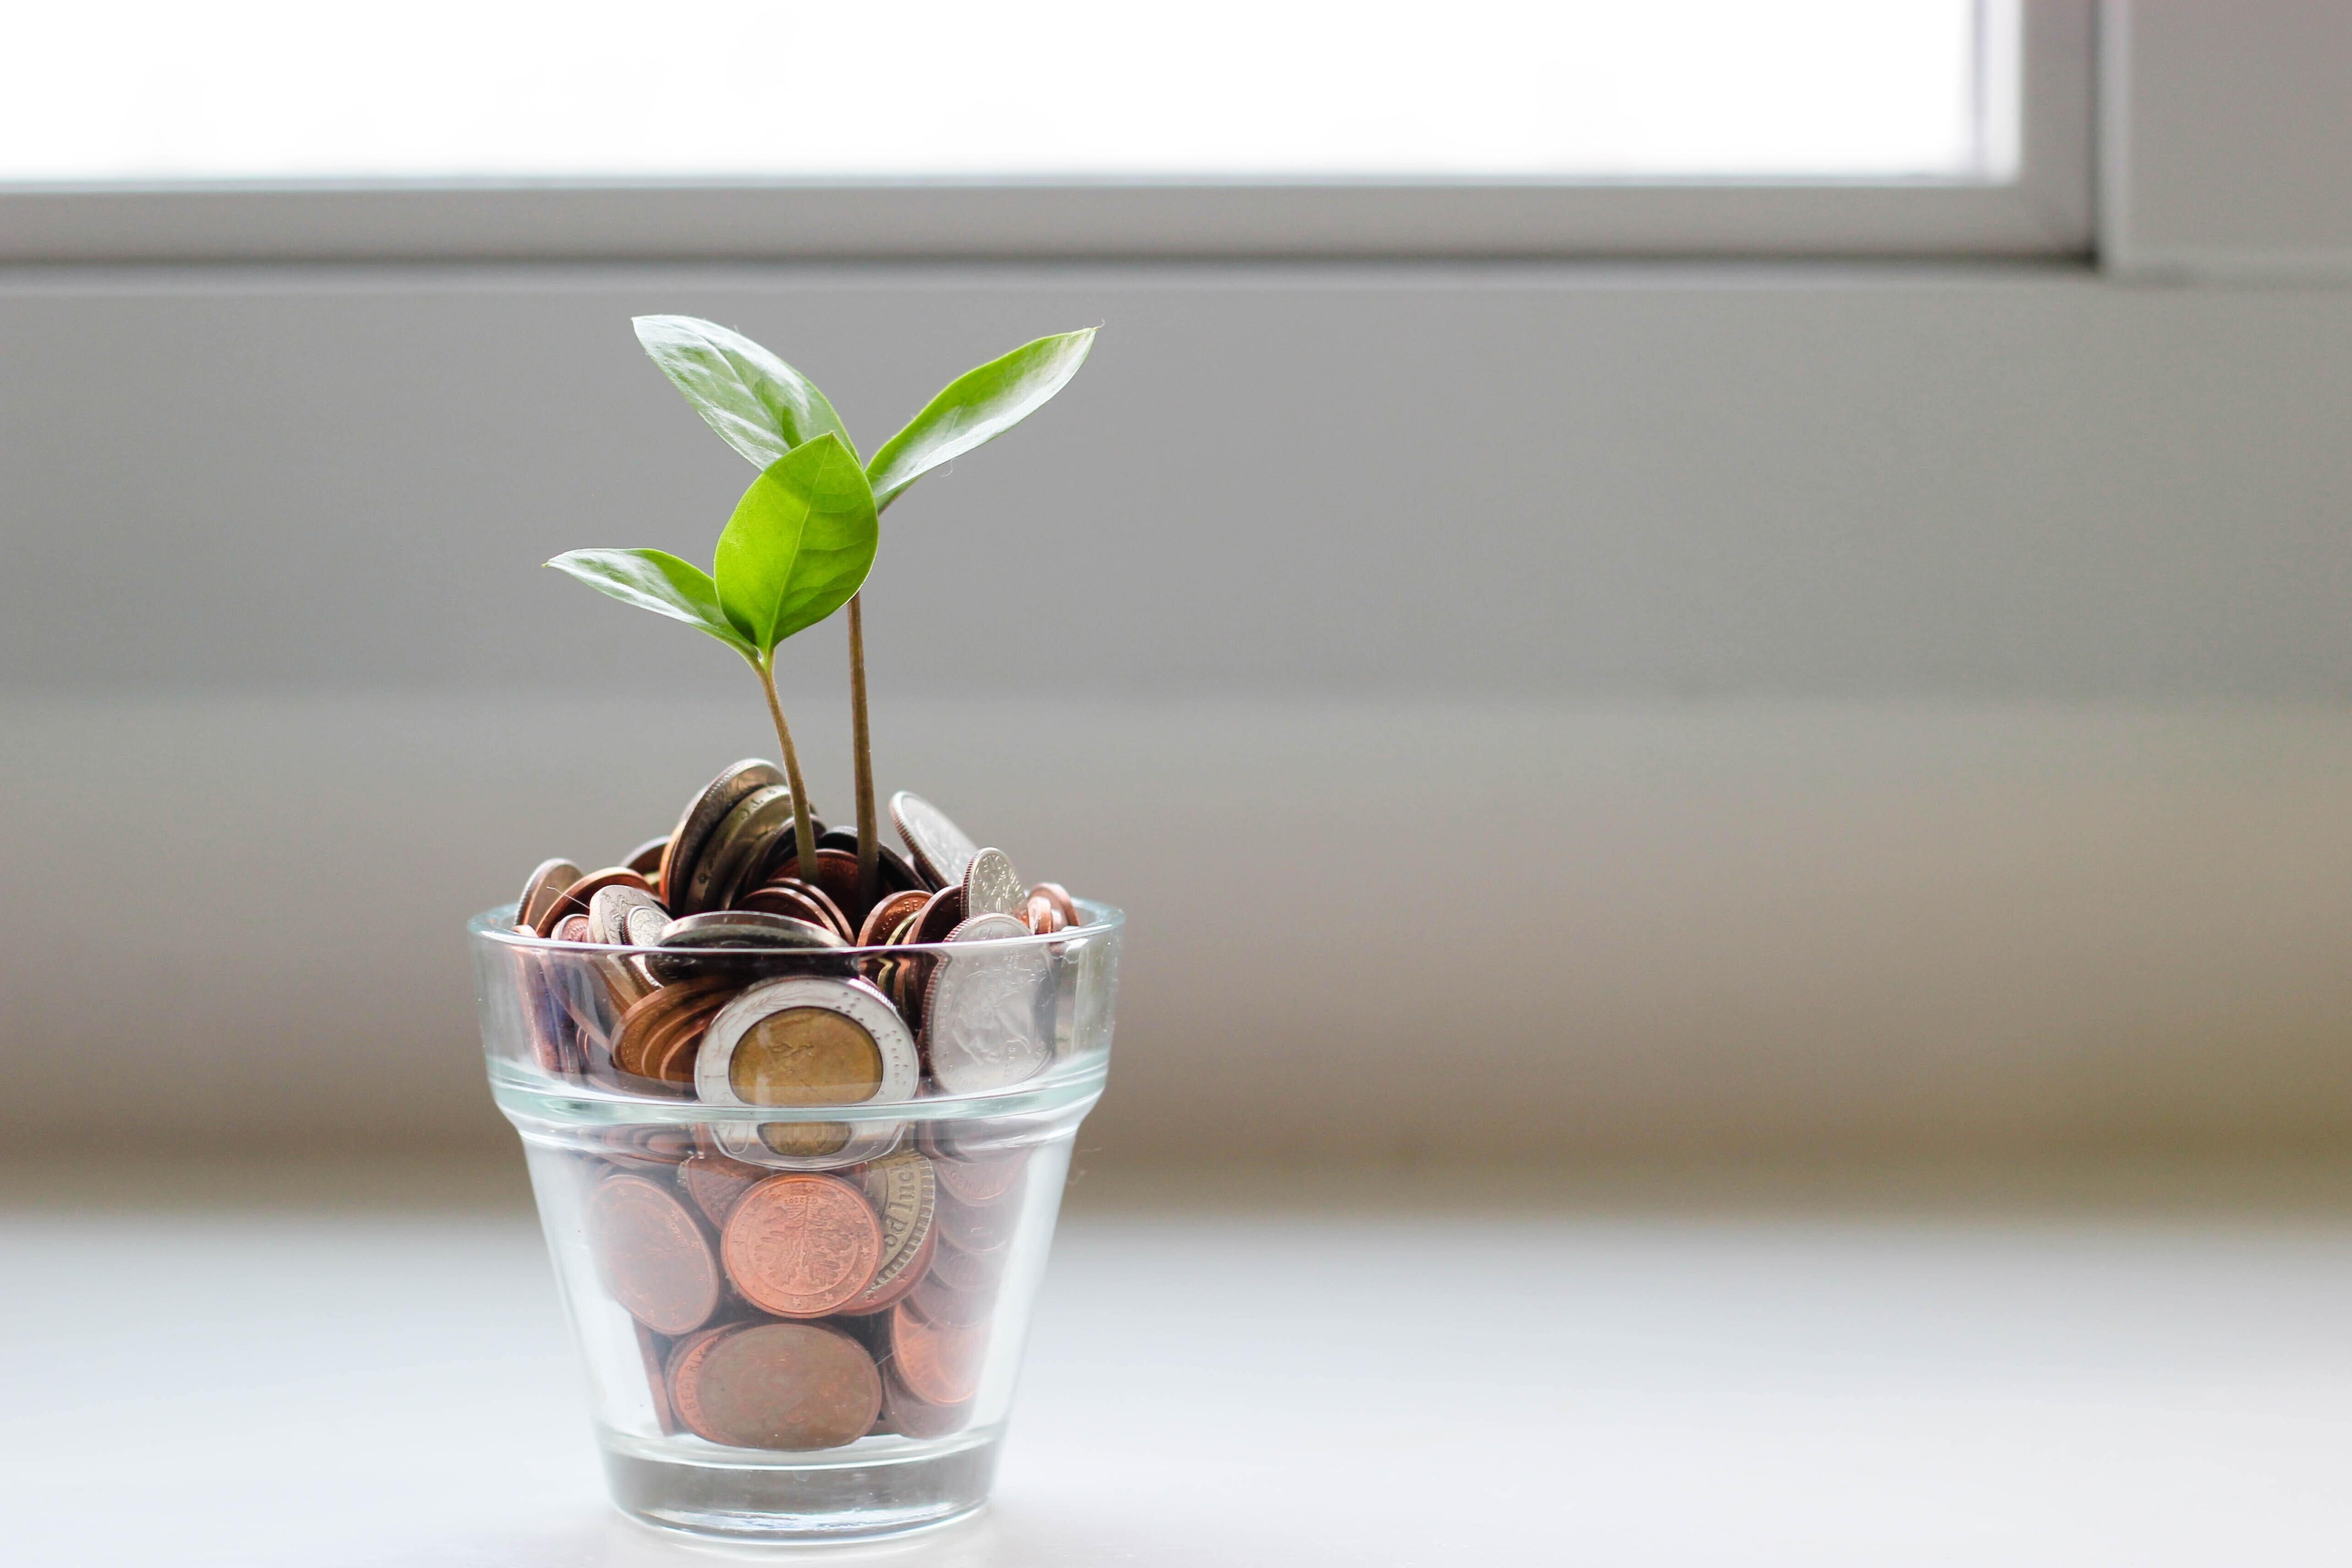 A small glass filled with coins has two small plants growing out of it.